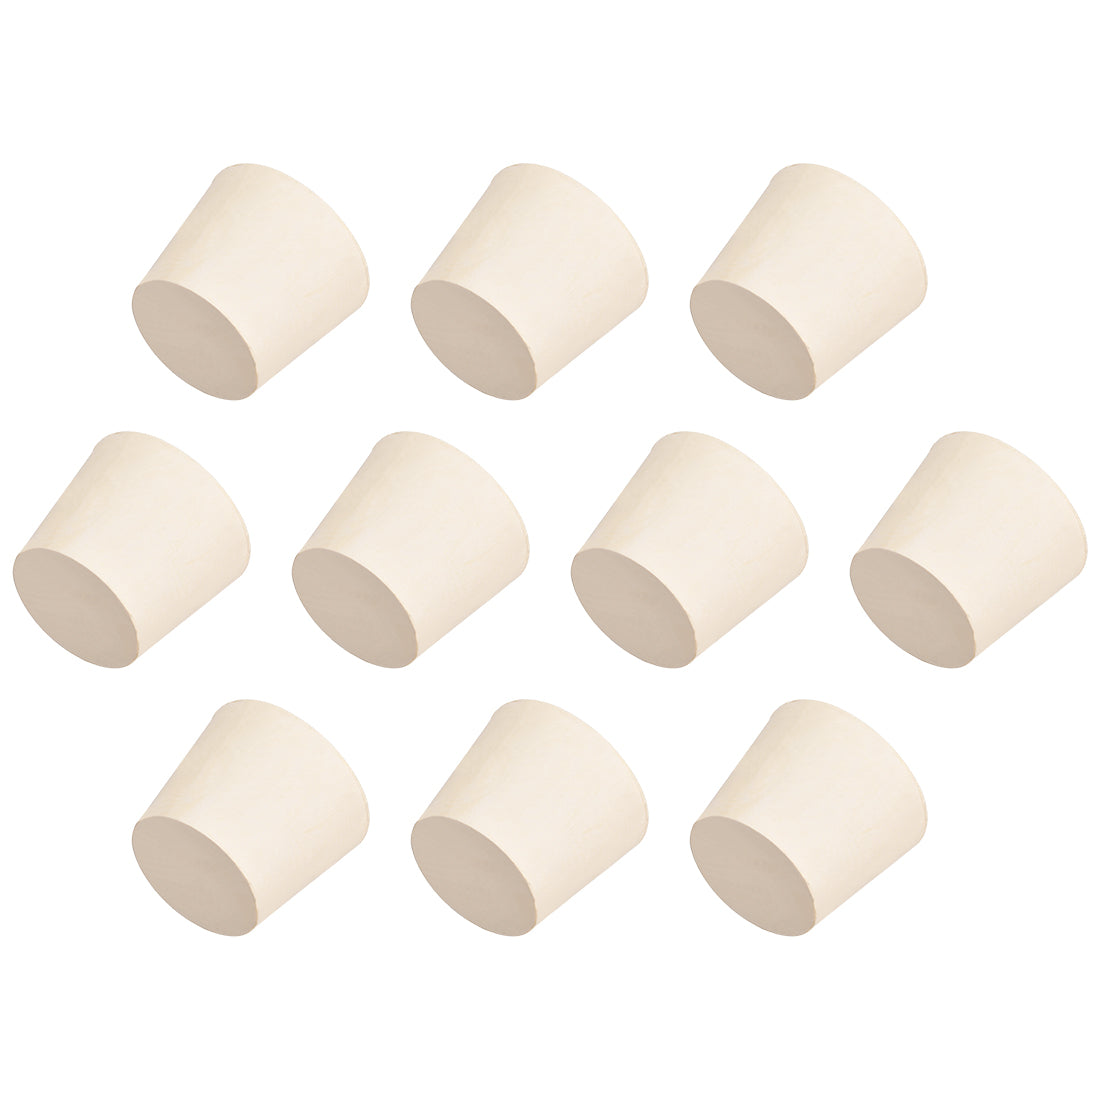 uxcell Uxcell White Tapered Shaped Solid Rubber Stopper for Lab Tube Stopper Size 10pcs